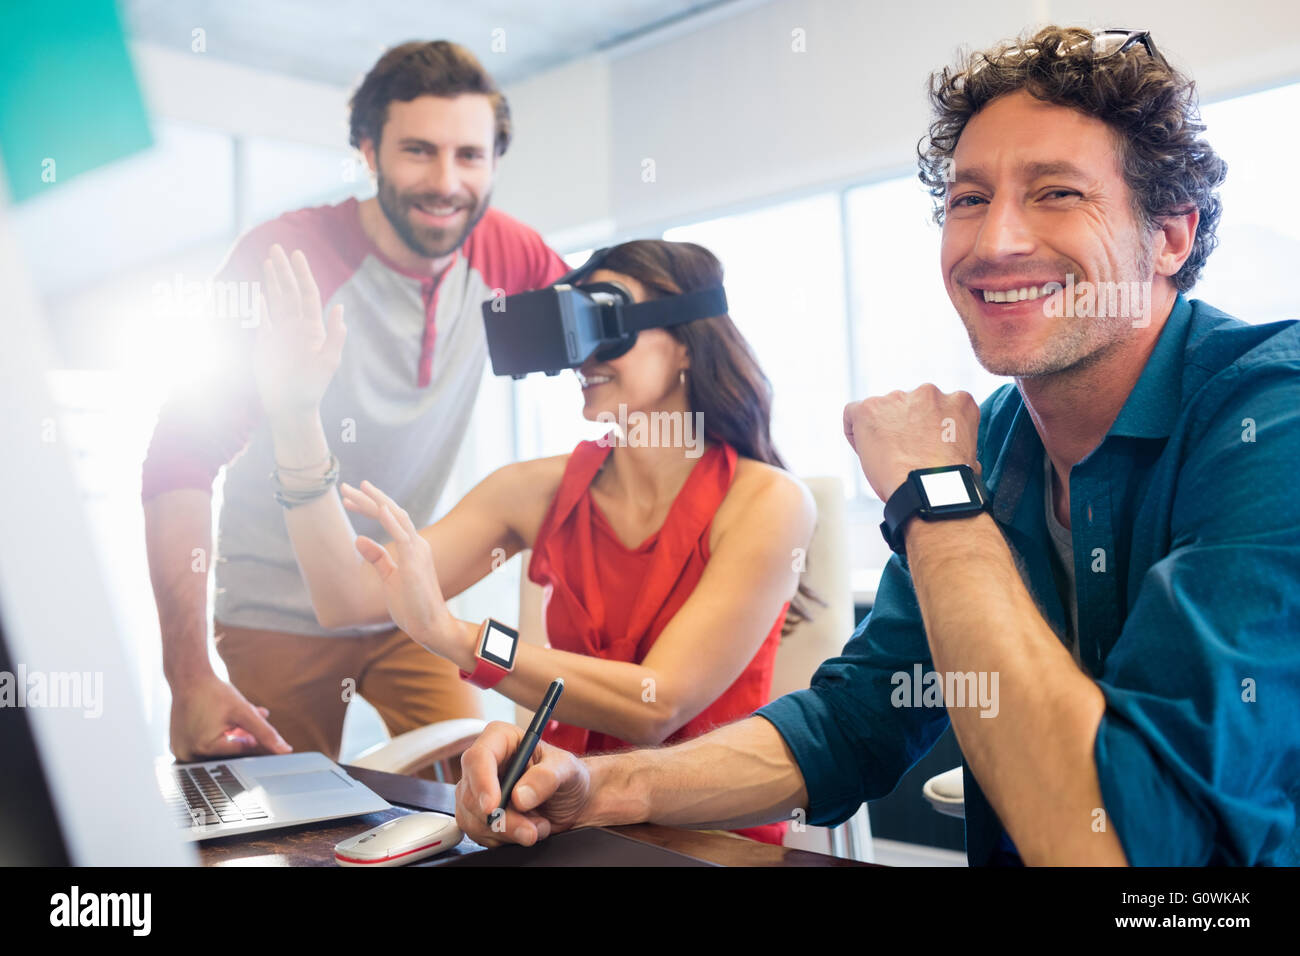 Colleagues using technology Stock Photo